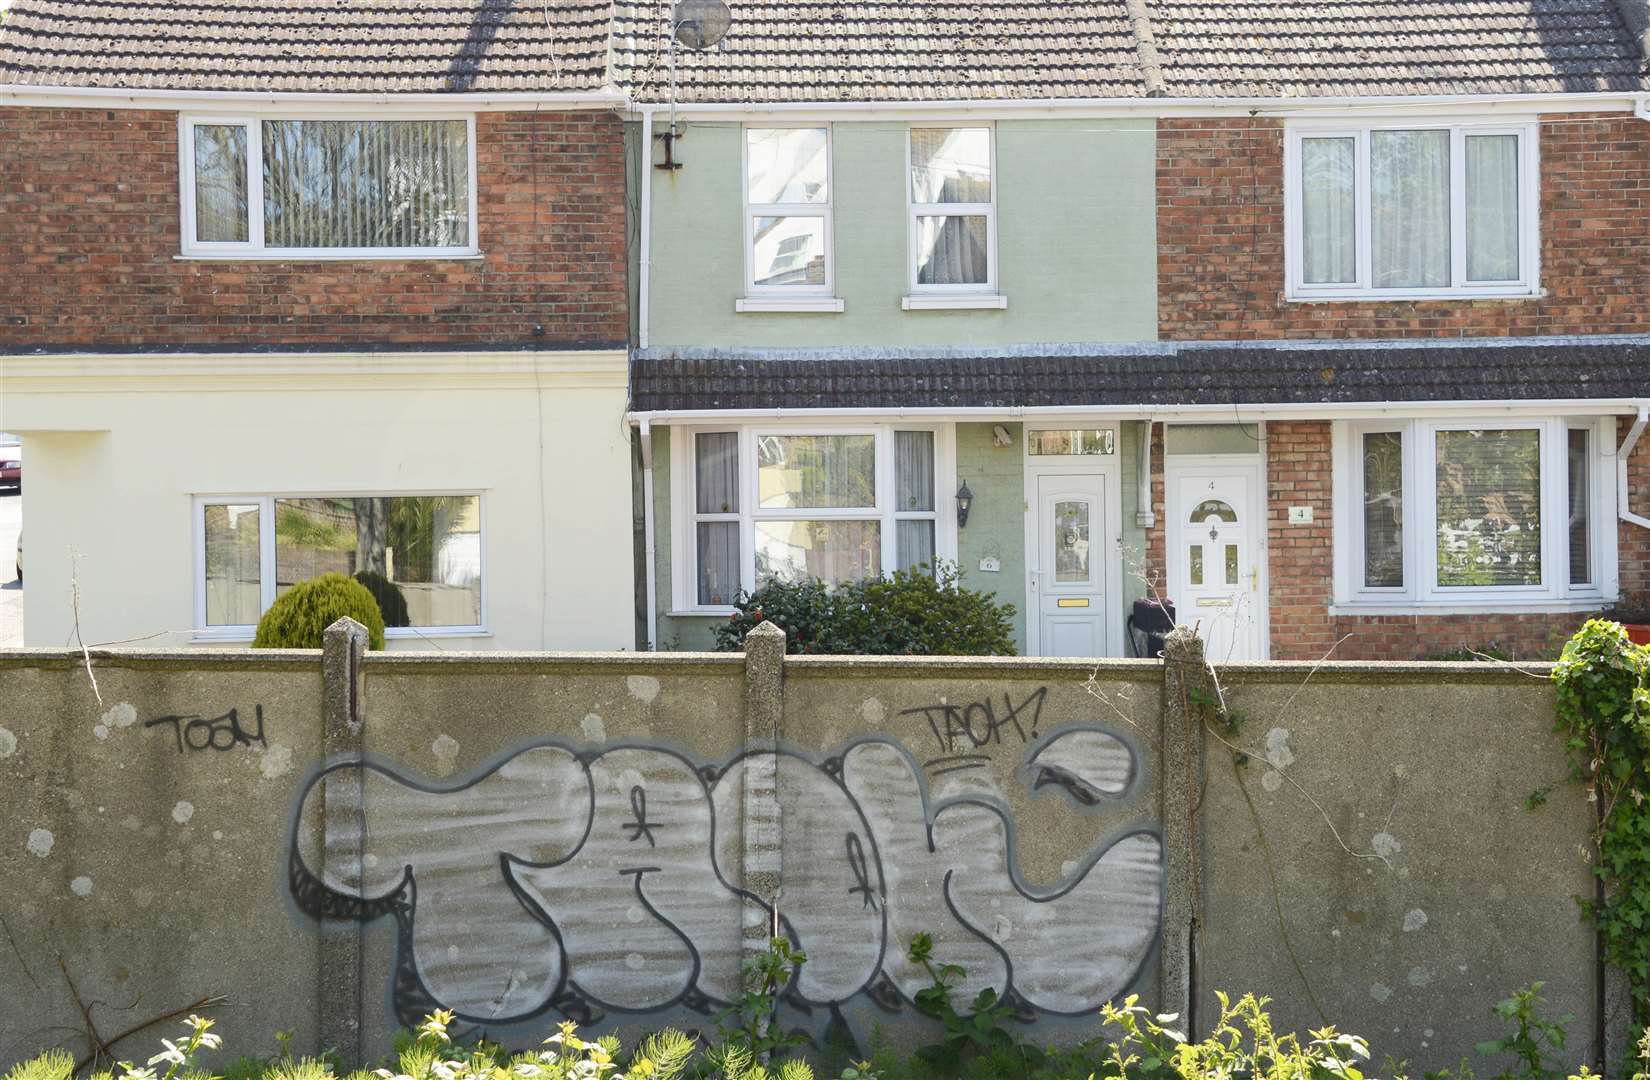 Graffiti on walls in front of homes in Dudley Road